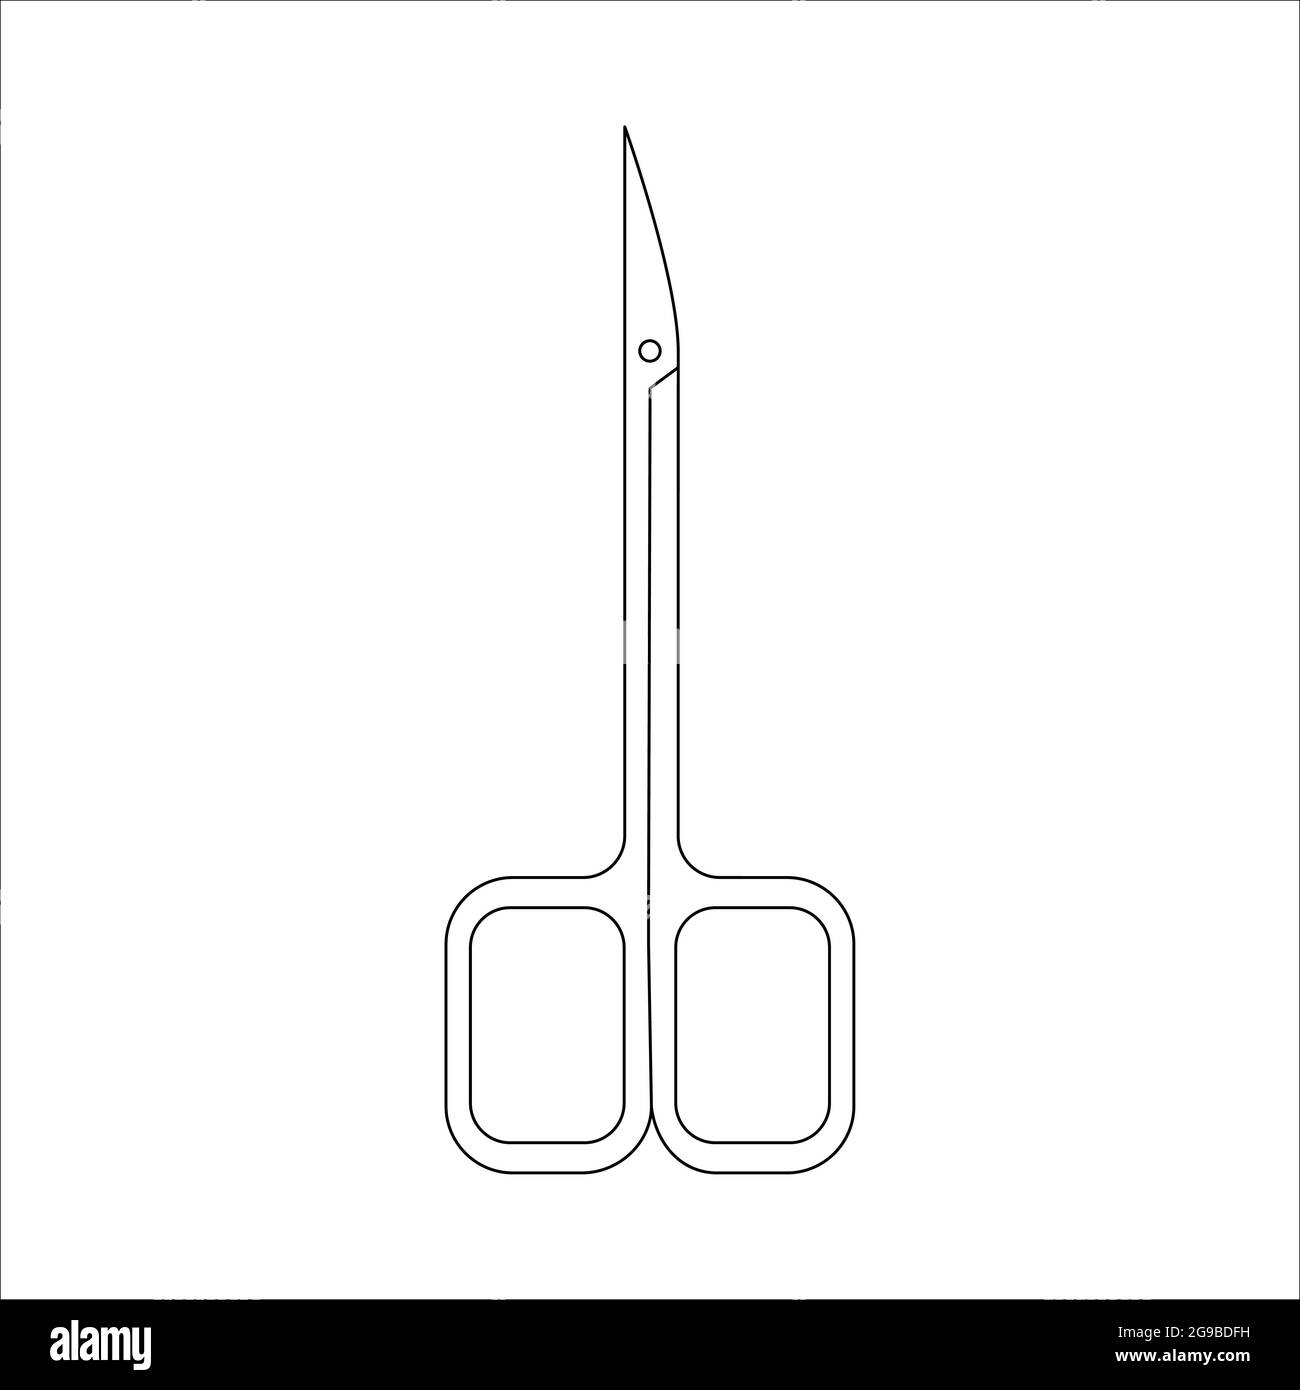 Nail scissors outline vector icon isolated on white background. Thin line black nail scissors sign. Stock Vector